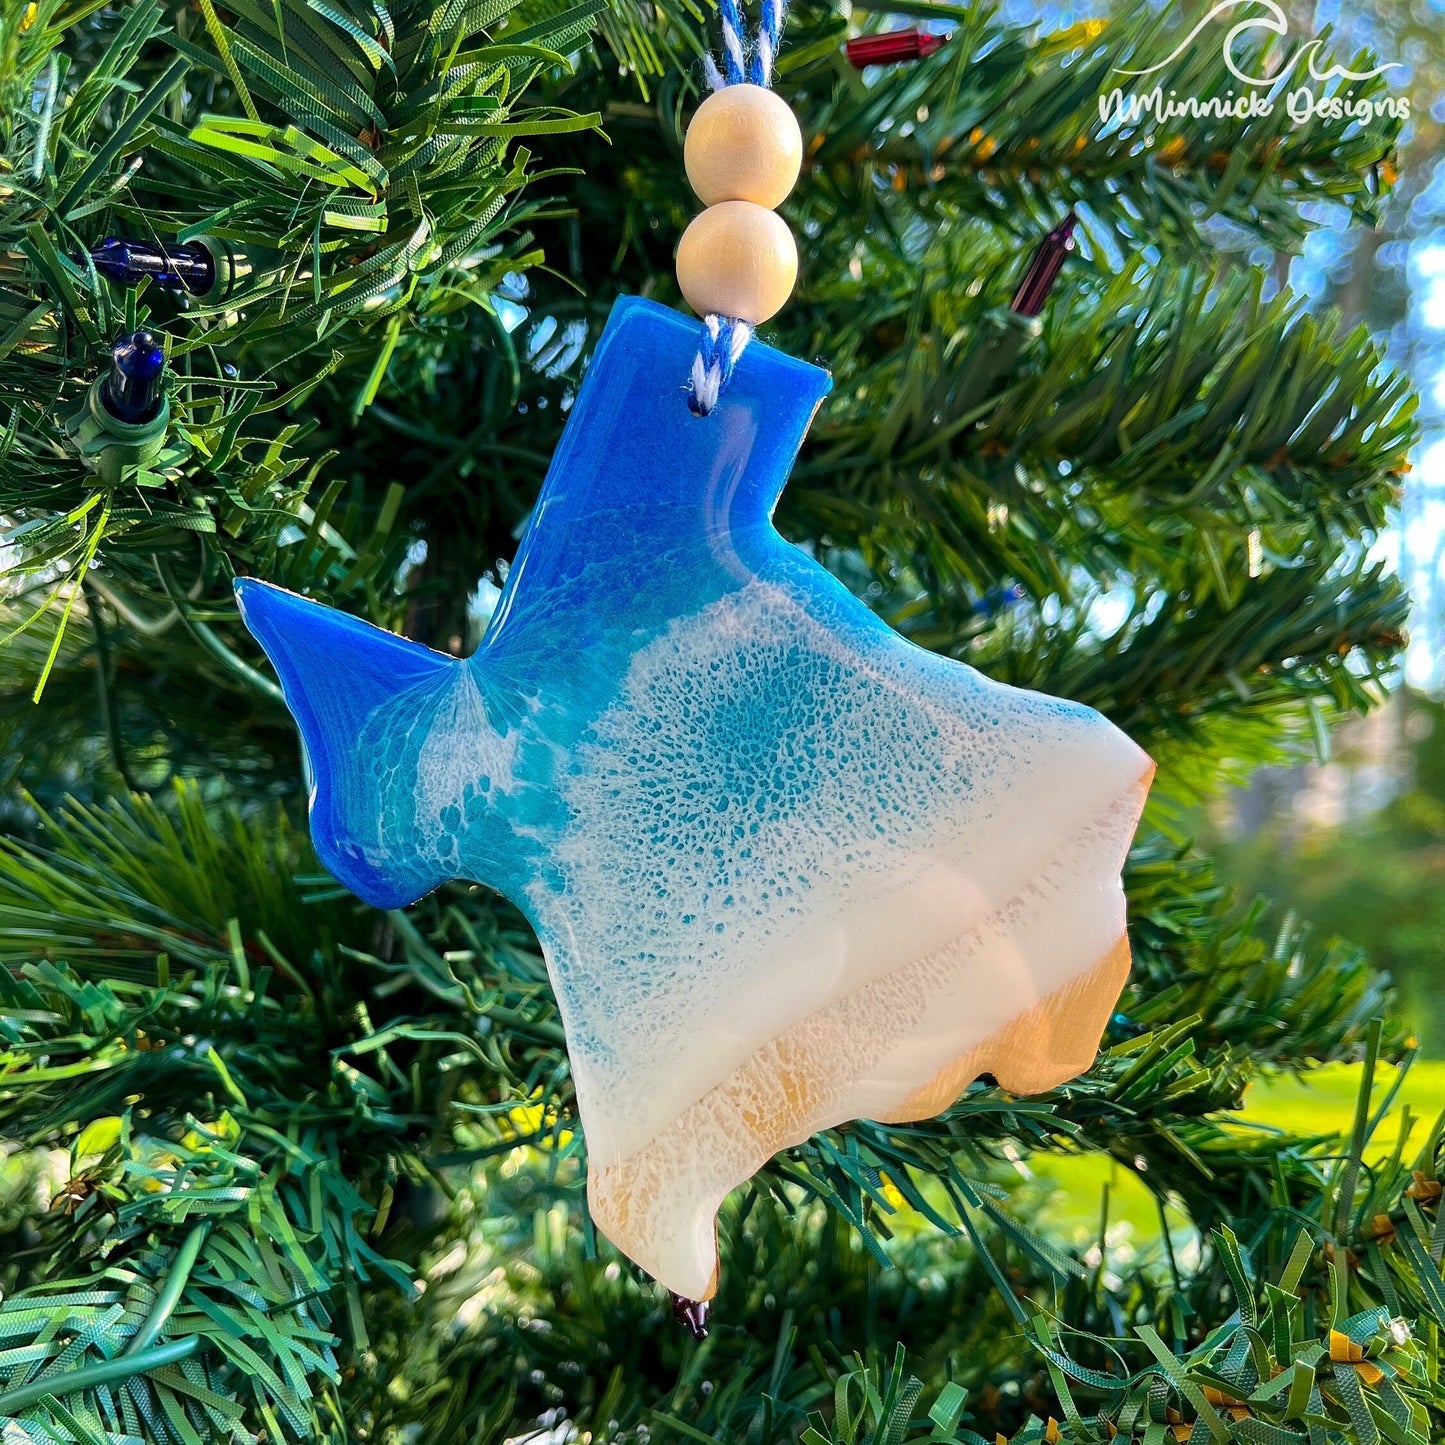 Texas-shaped wooden Christmas ornament covered in blue and teal colored ocean resin art resembling the waves along Texas&#39; Gulf Coast. Finished with blue and white baker&#39;s twine and two wooden beads.